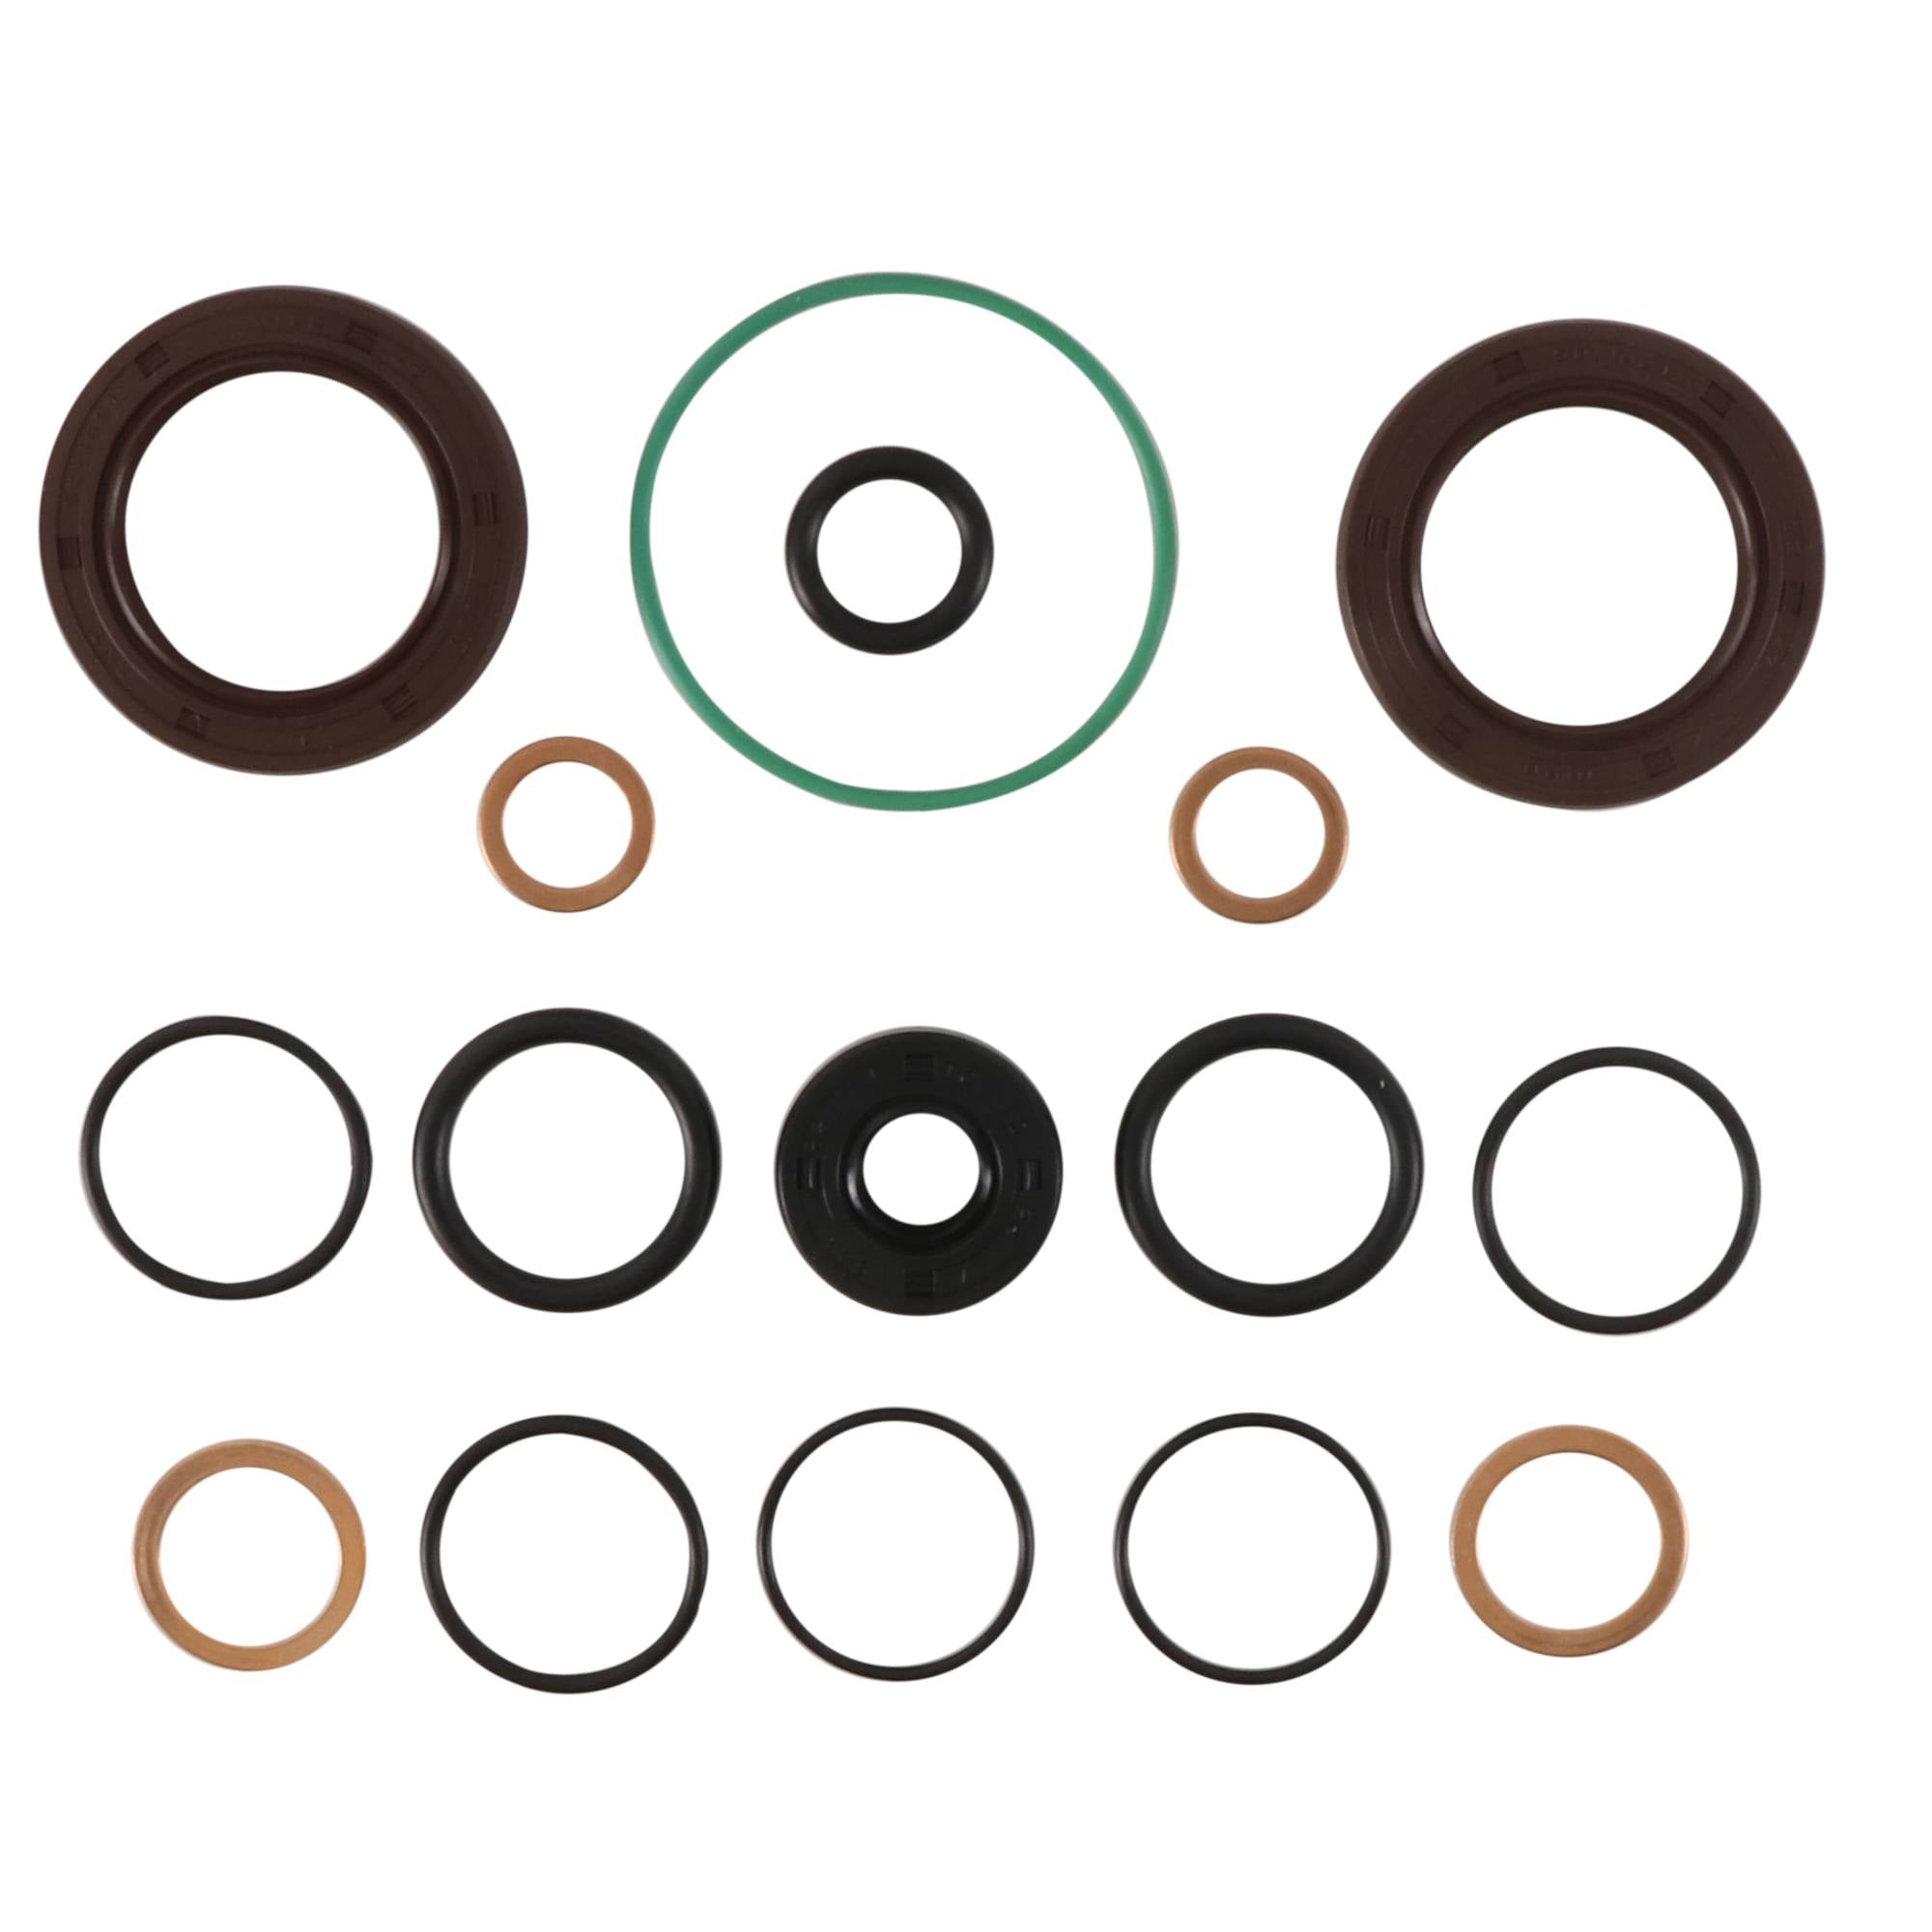 Outlander 1000 XT 2019 Outlander 500 LTD 4x4 2010 Outlander 1000 XTP 2019 New All Balls 25-7151 Transmission seal kit Compatible with/Replacement For Can-Am Outlander 1000 DPS 2019 